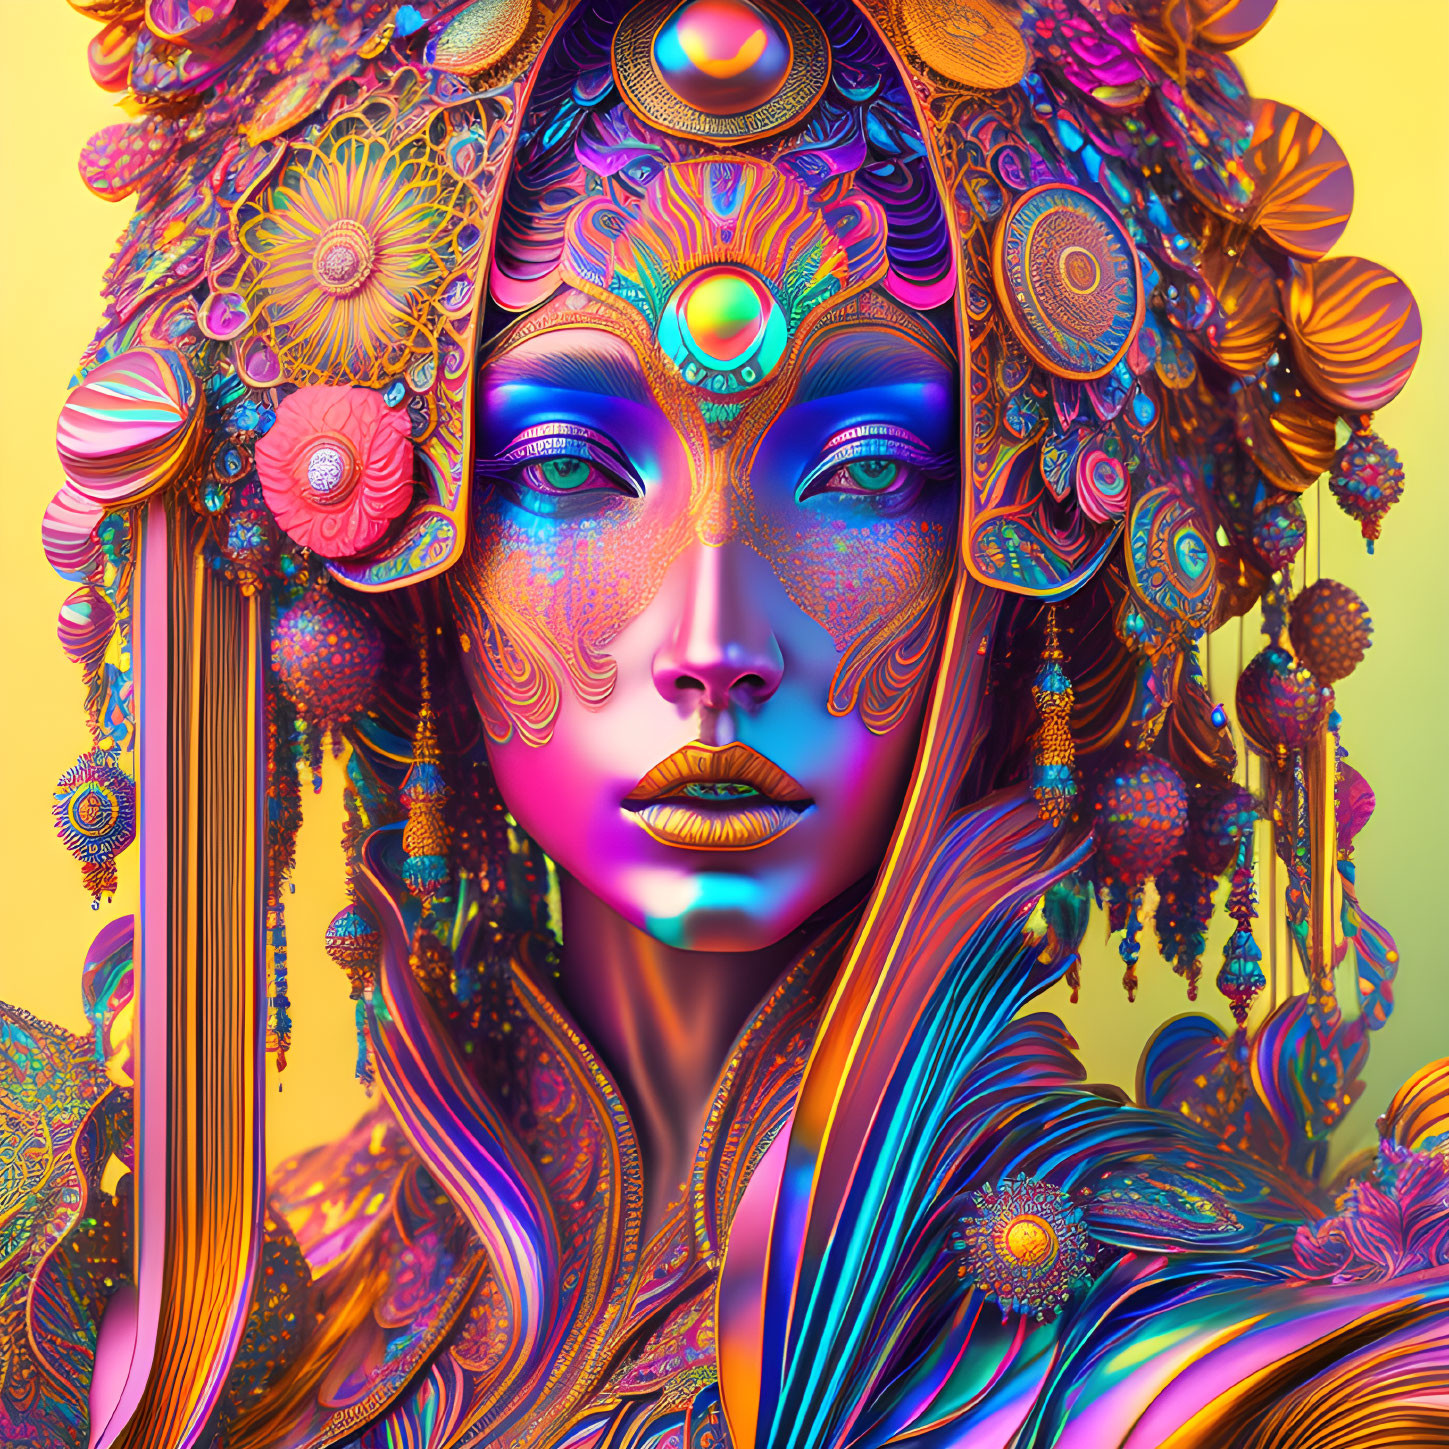 Colorful digital artwork of female figure with intricate patterns and mystical aura